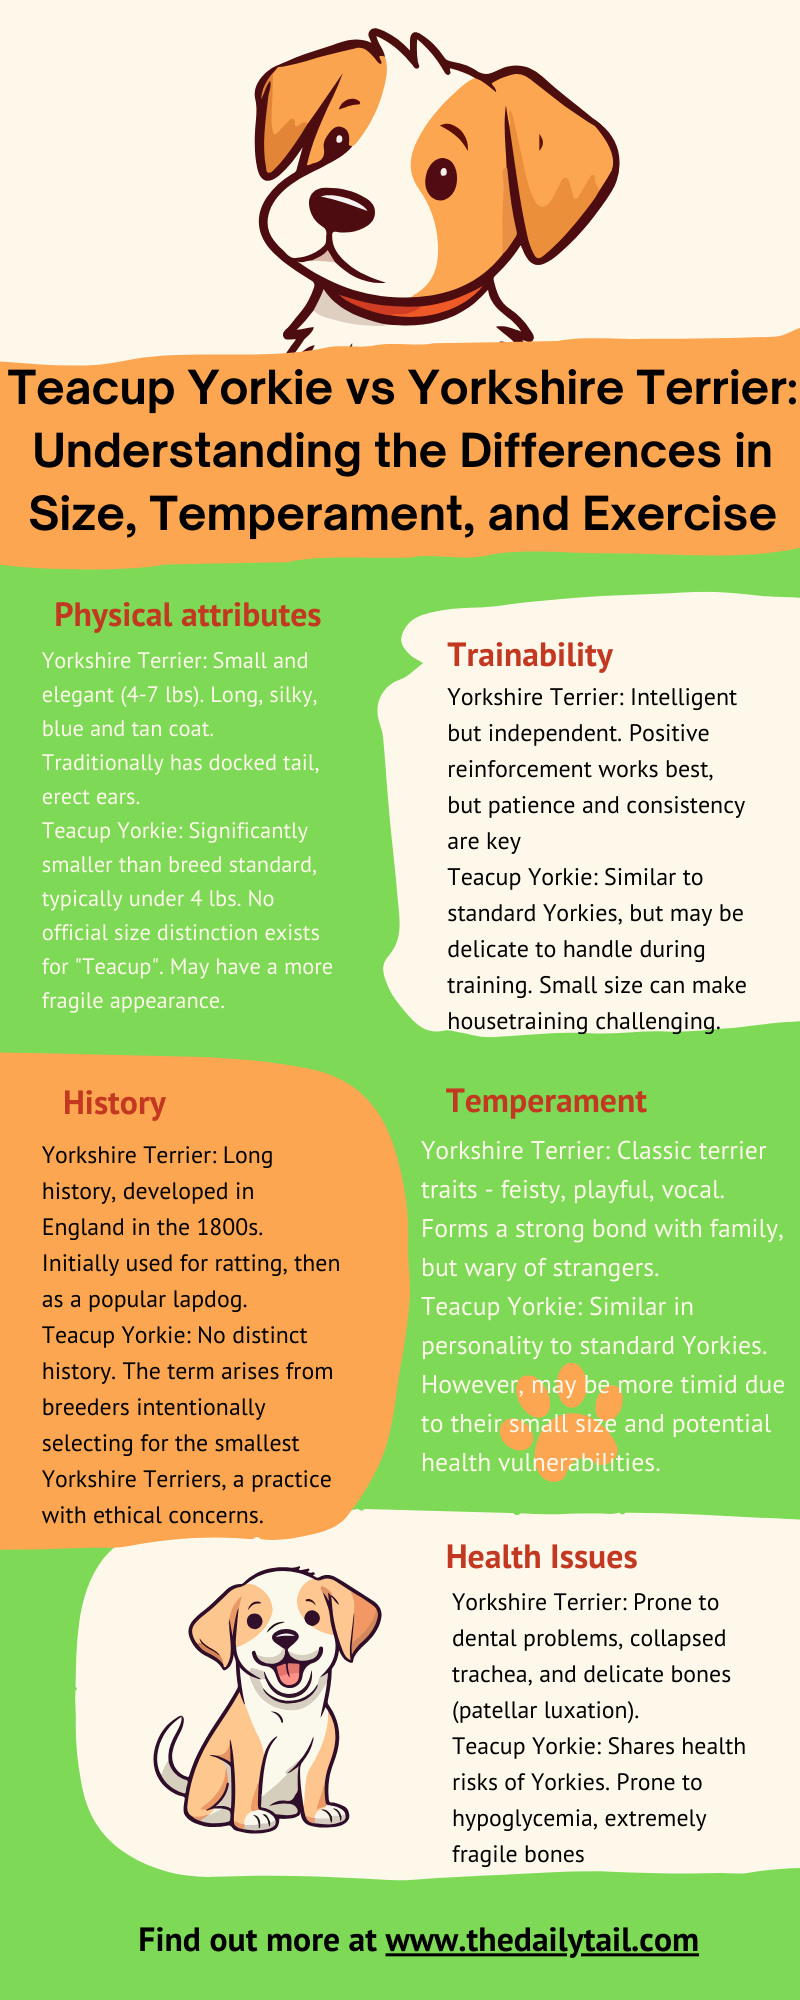 Yorkshire Terrier vs Teacup Yorkie infographic